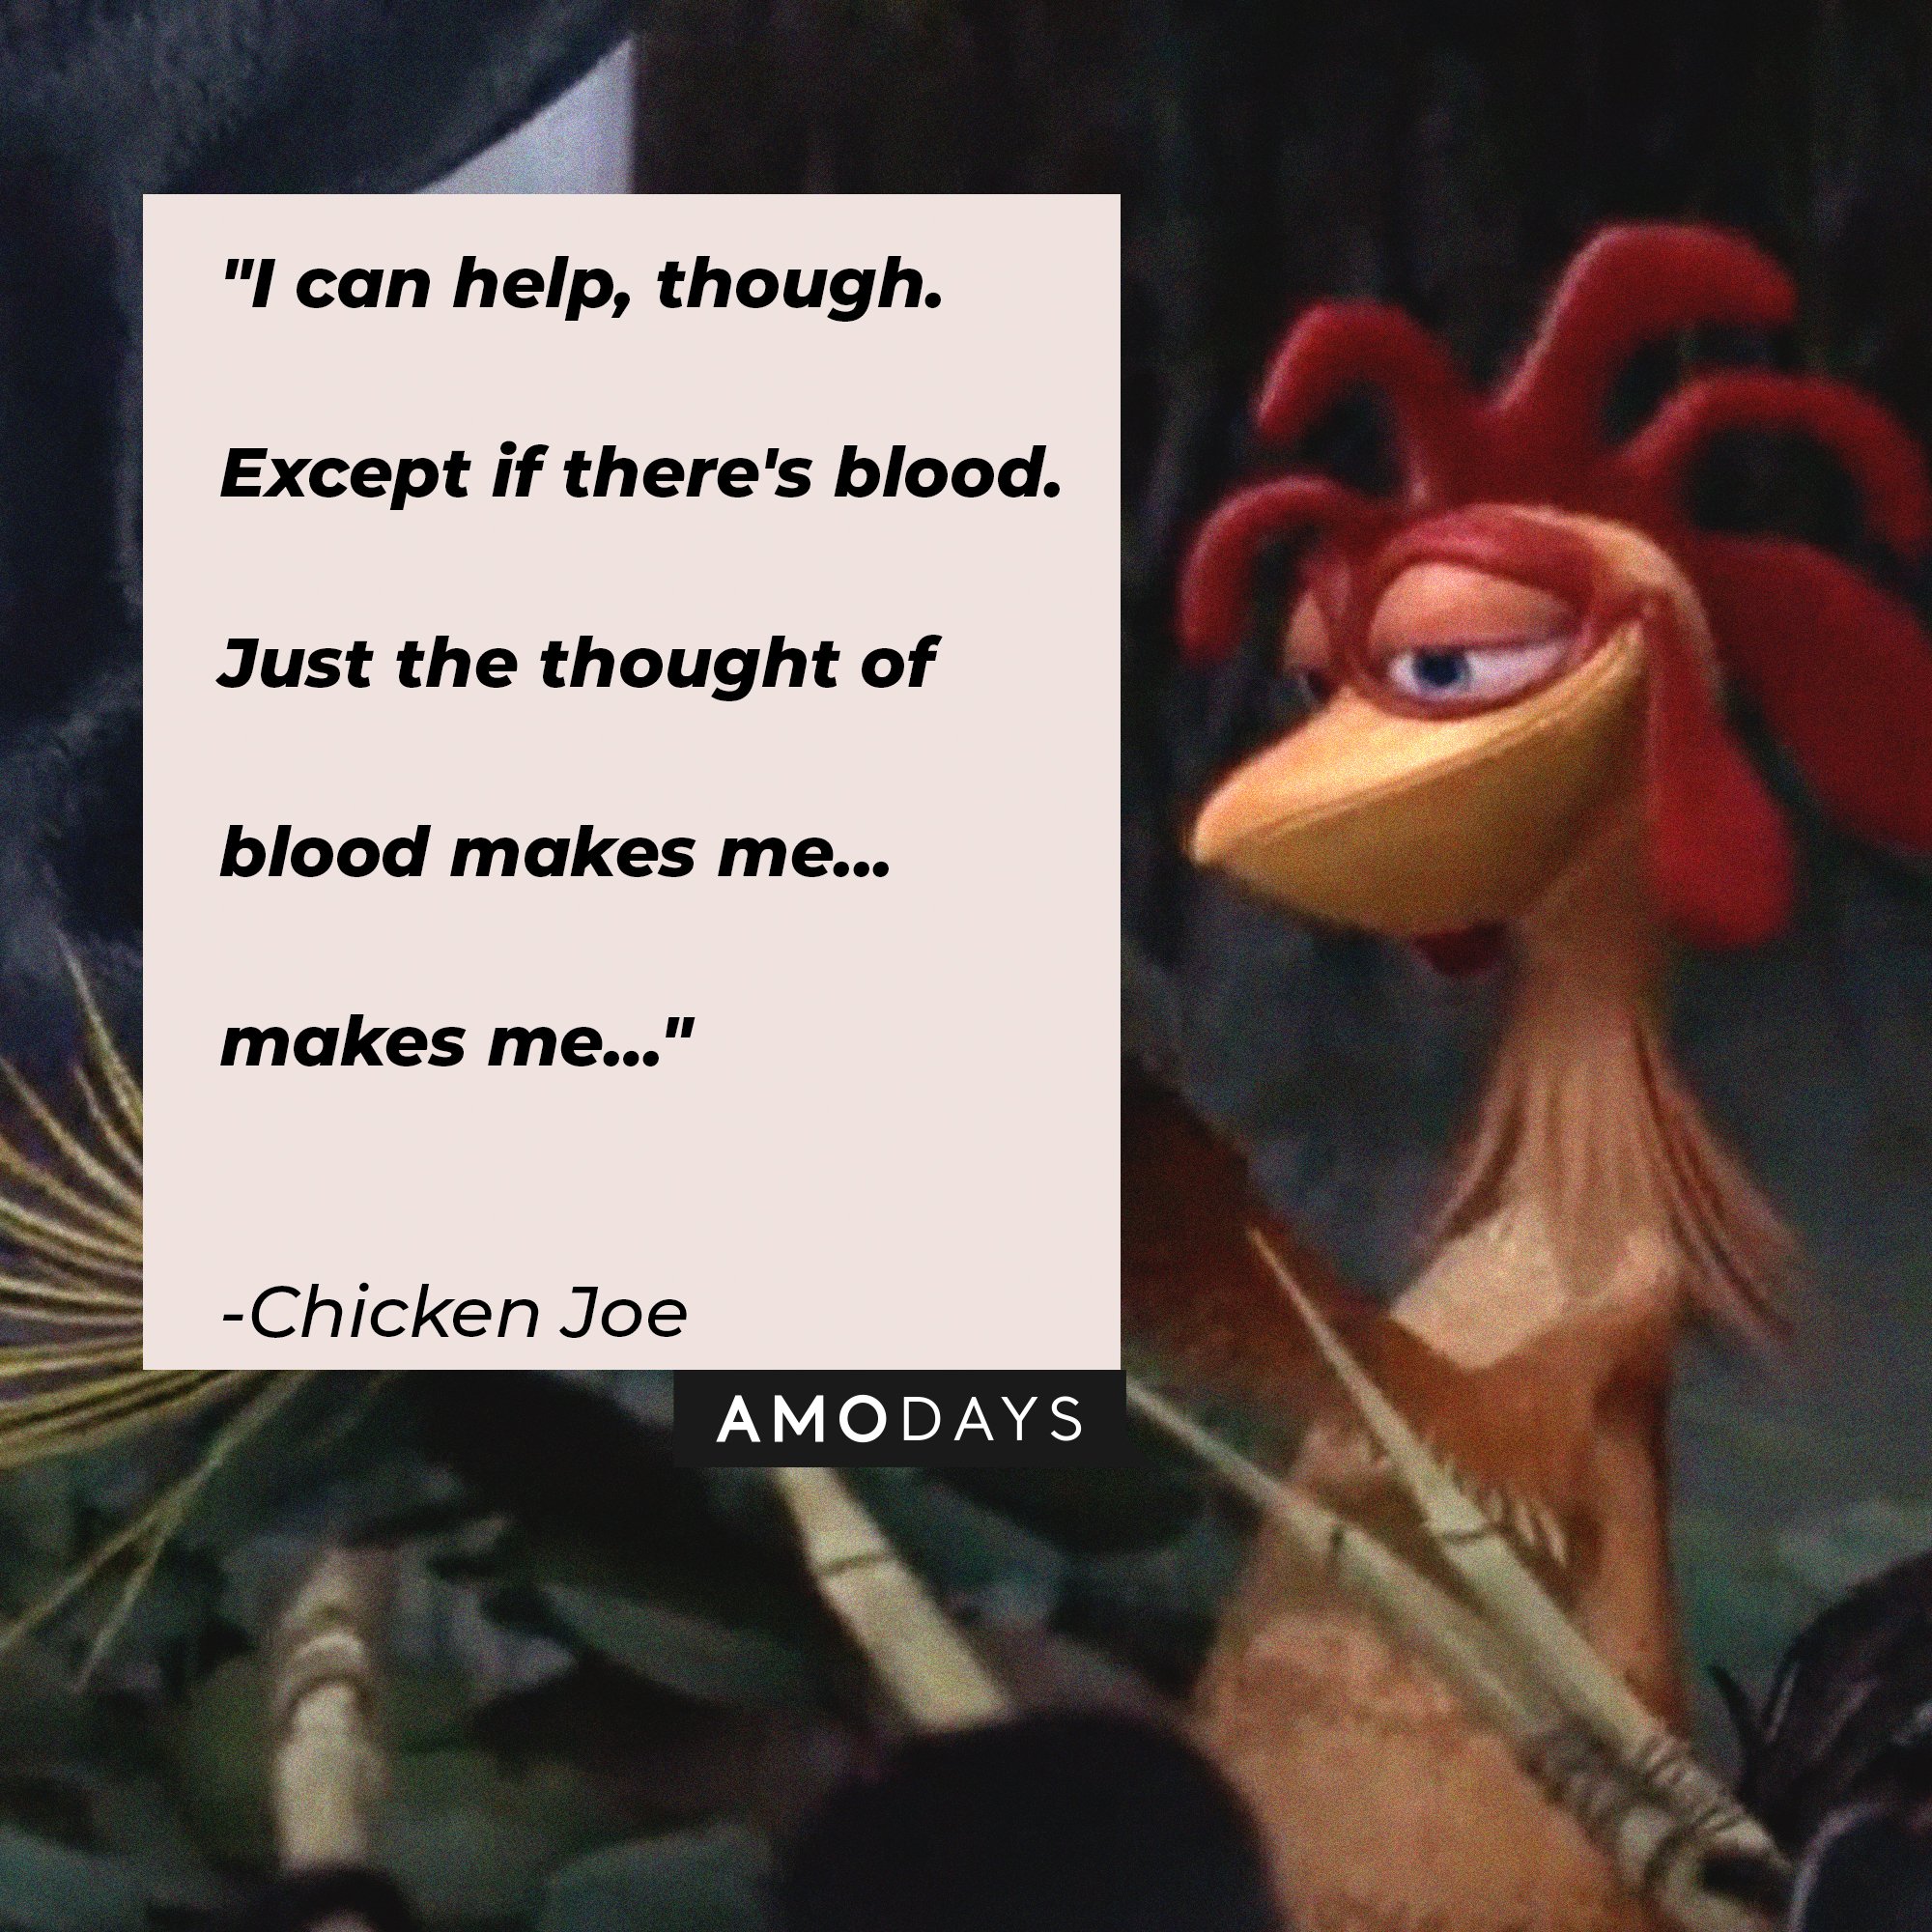 Chicken Joe's quote: "I can help, though. Except if there's blood. Just the thought of blood makes me... makes me…" | Image: AmoDays